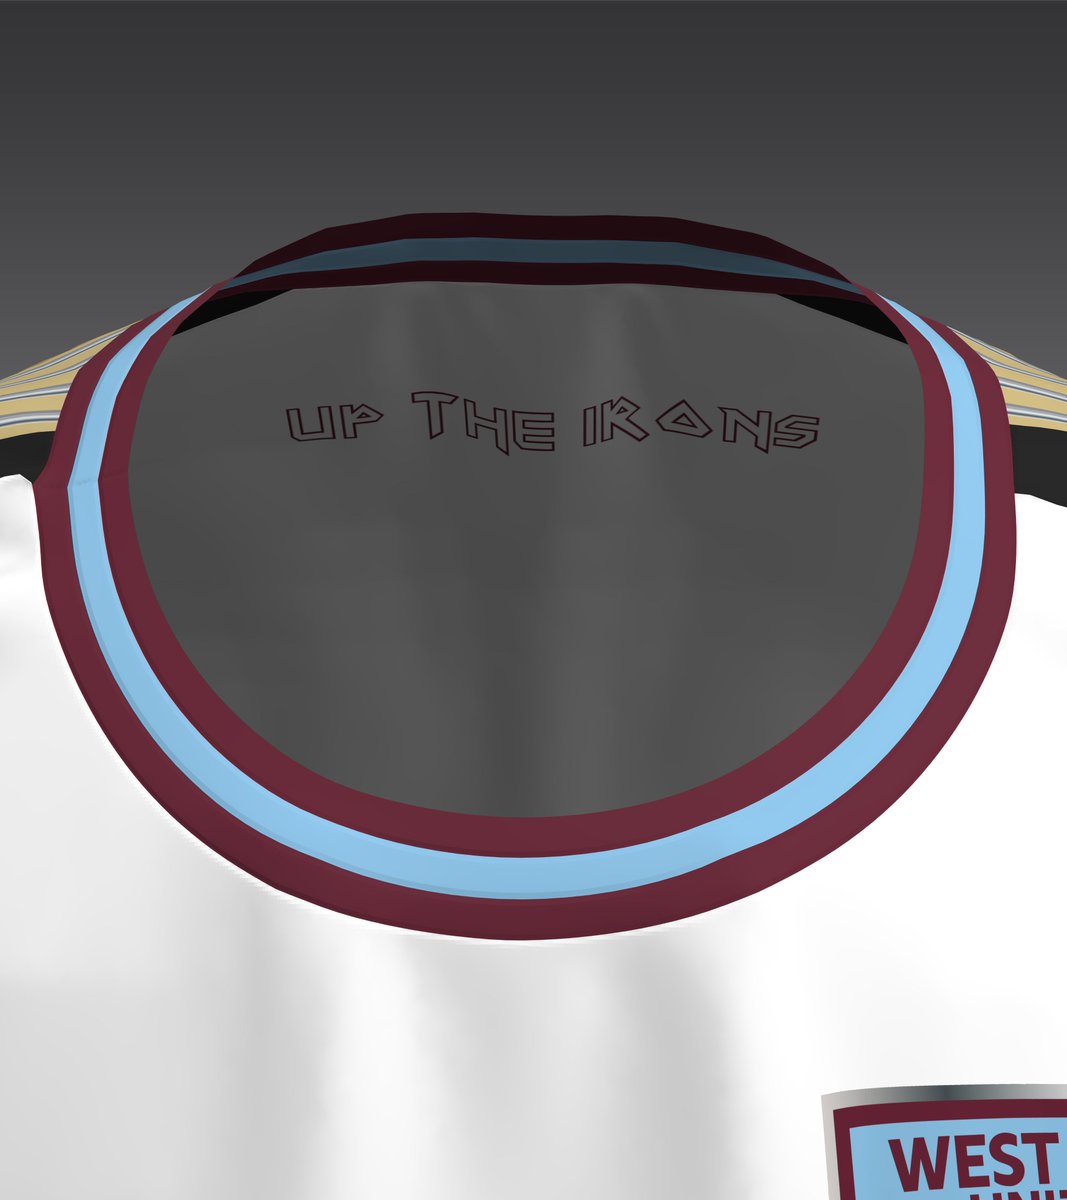 Jack Henderson on Twitter: "The inner neck features the iconic, West Ham-inspired Iron Maiden tagline "Up the Irons" (picture). Metallic *ba dum and sponsor logos finish the effect. https://t.co/Hko9UHOGCB" /